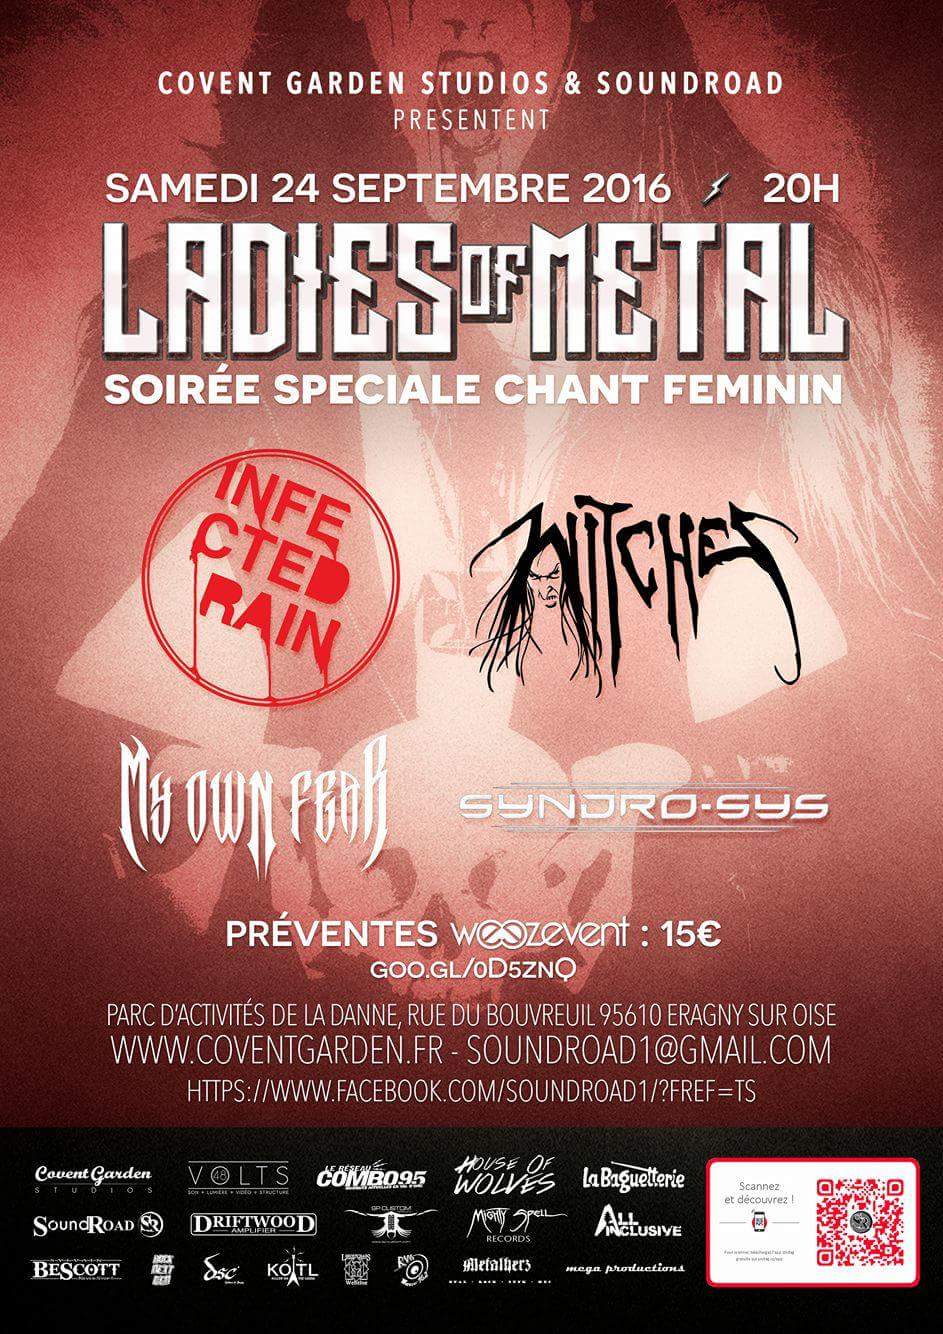 Witches flyer Infected Rain (Mol) - WITCHES - My Own Fear - Syndro-Sys  @ Ladies of Metal Covent Garden Eragny (95) - France